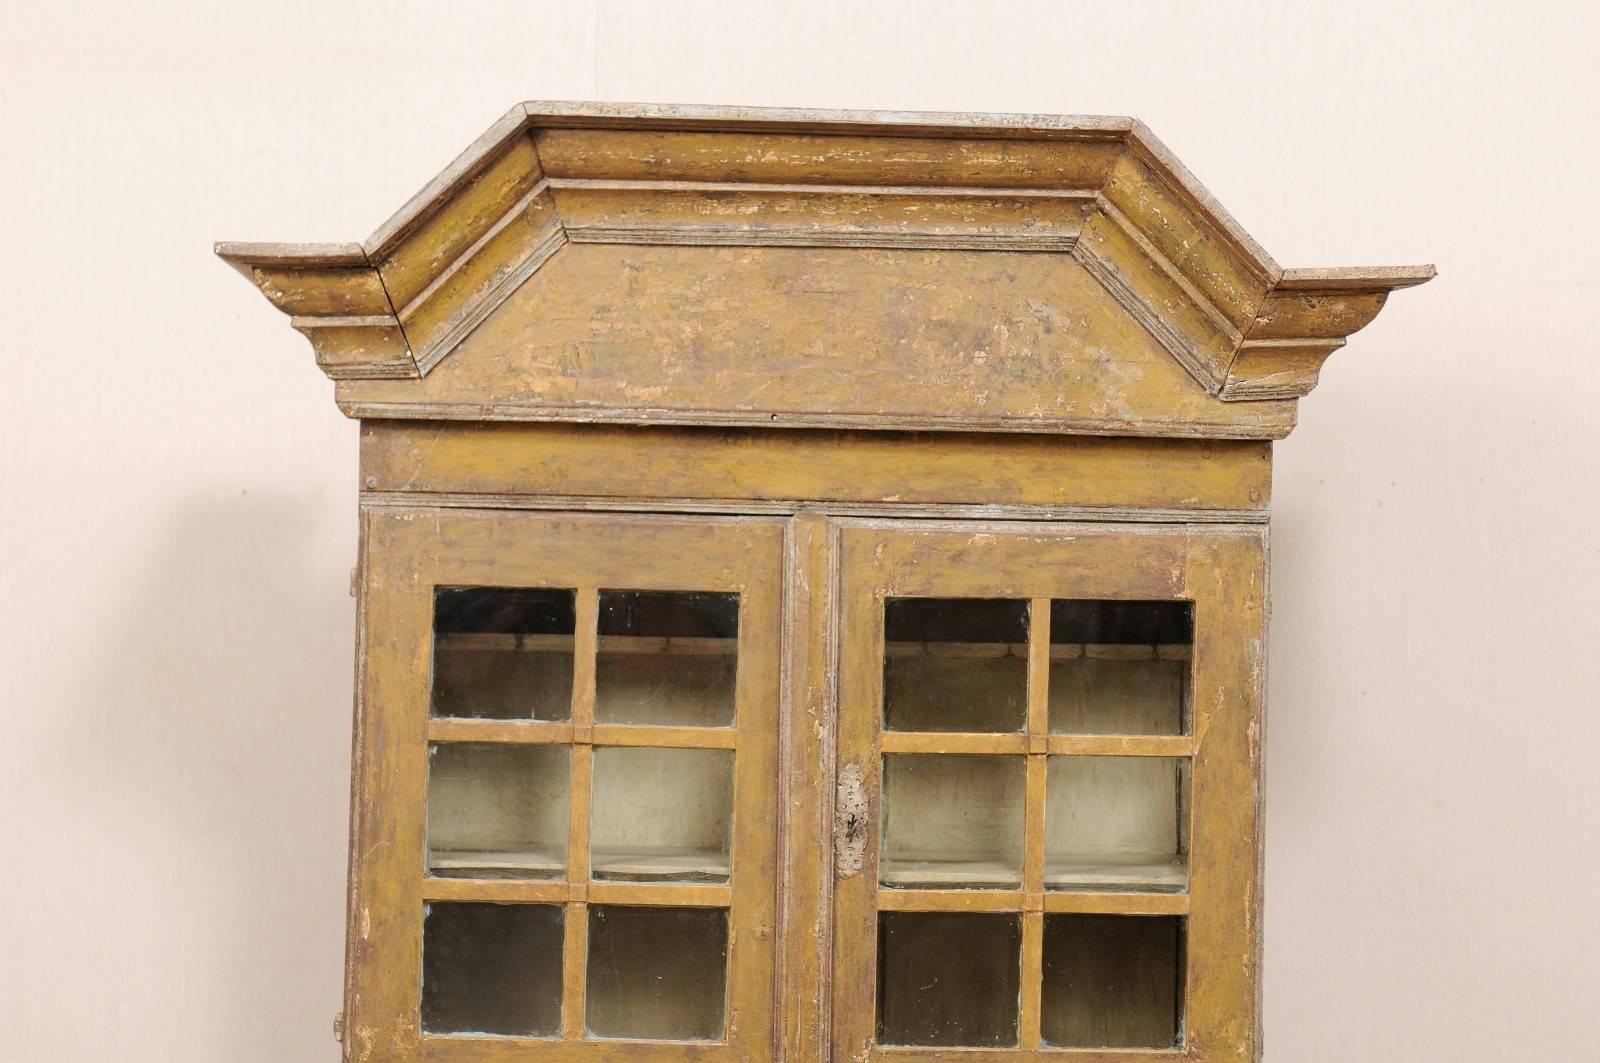 Carved 18th Century Swedish Cupboard Cabinet, circa 1725-1750 with Original Paint